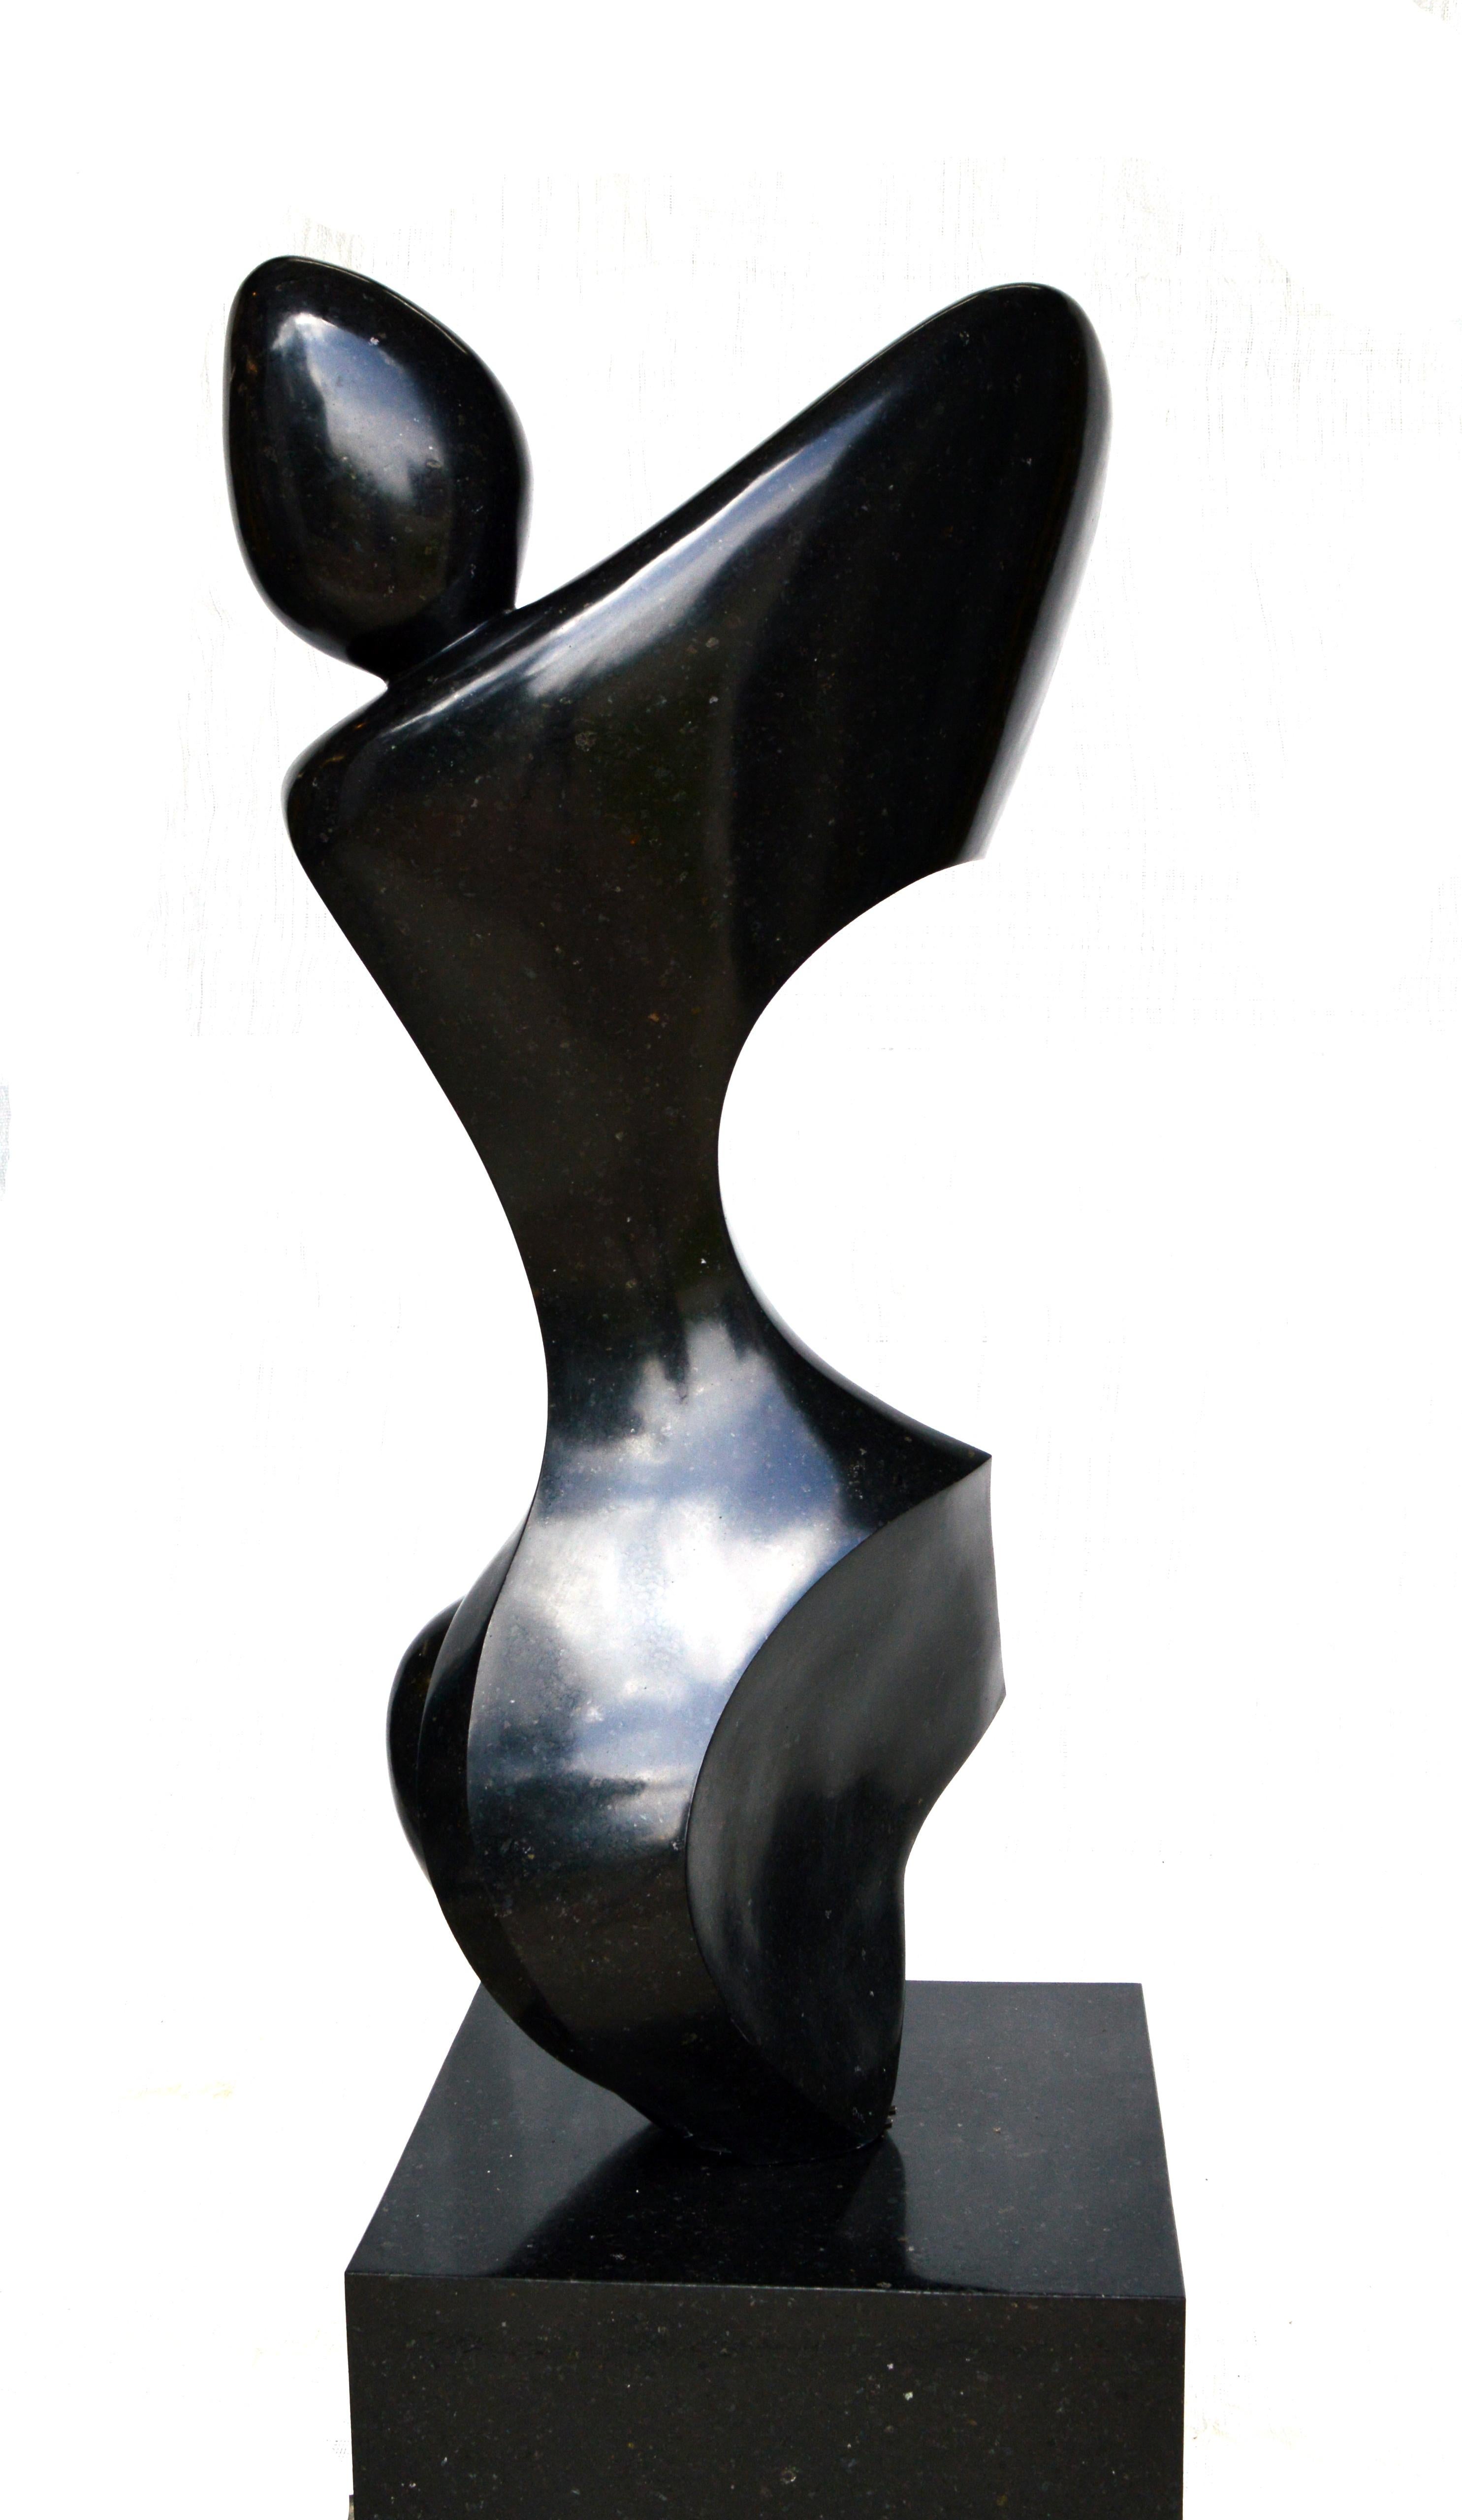 Anatomical 3/50 - smooth, black, granite, indoor/outdoor, figurative sculpture - Sculpture by Jeremy Guy